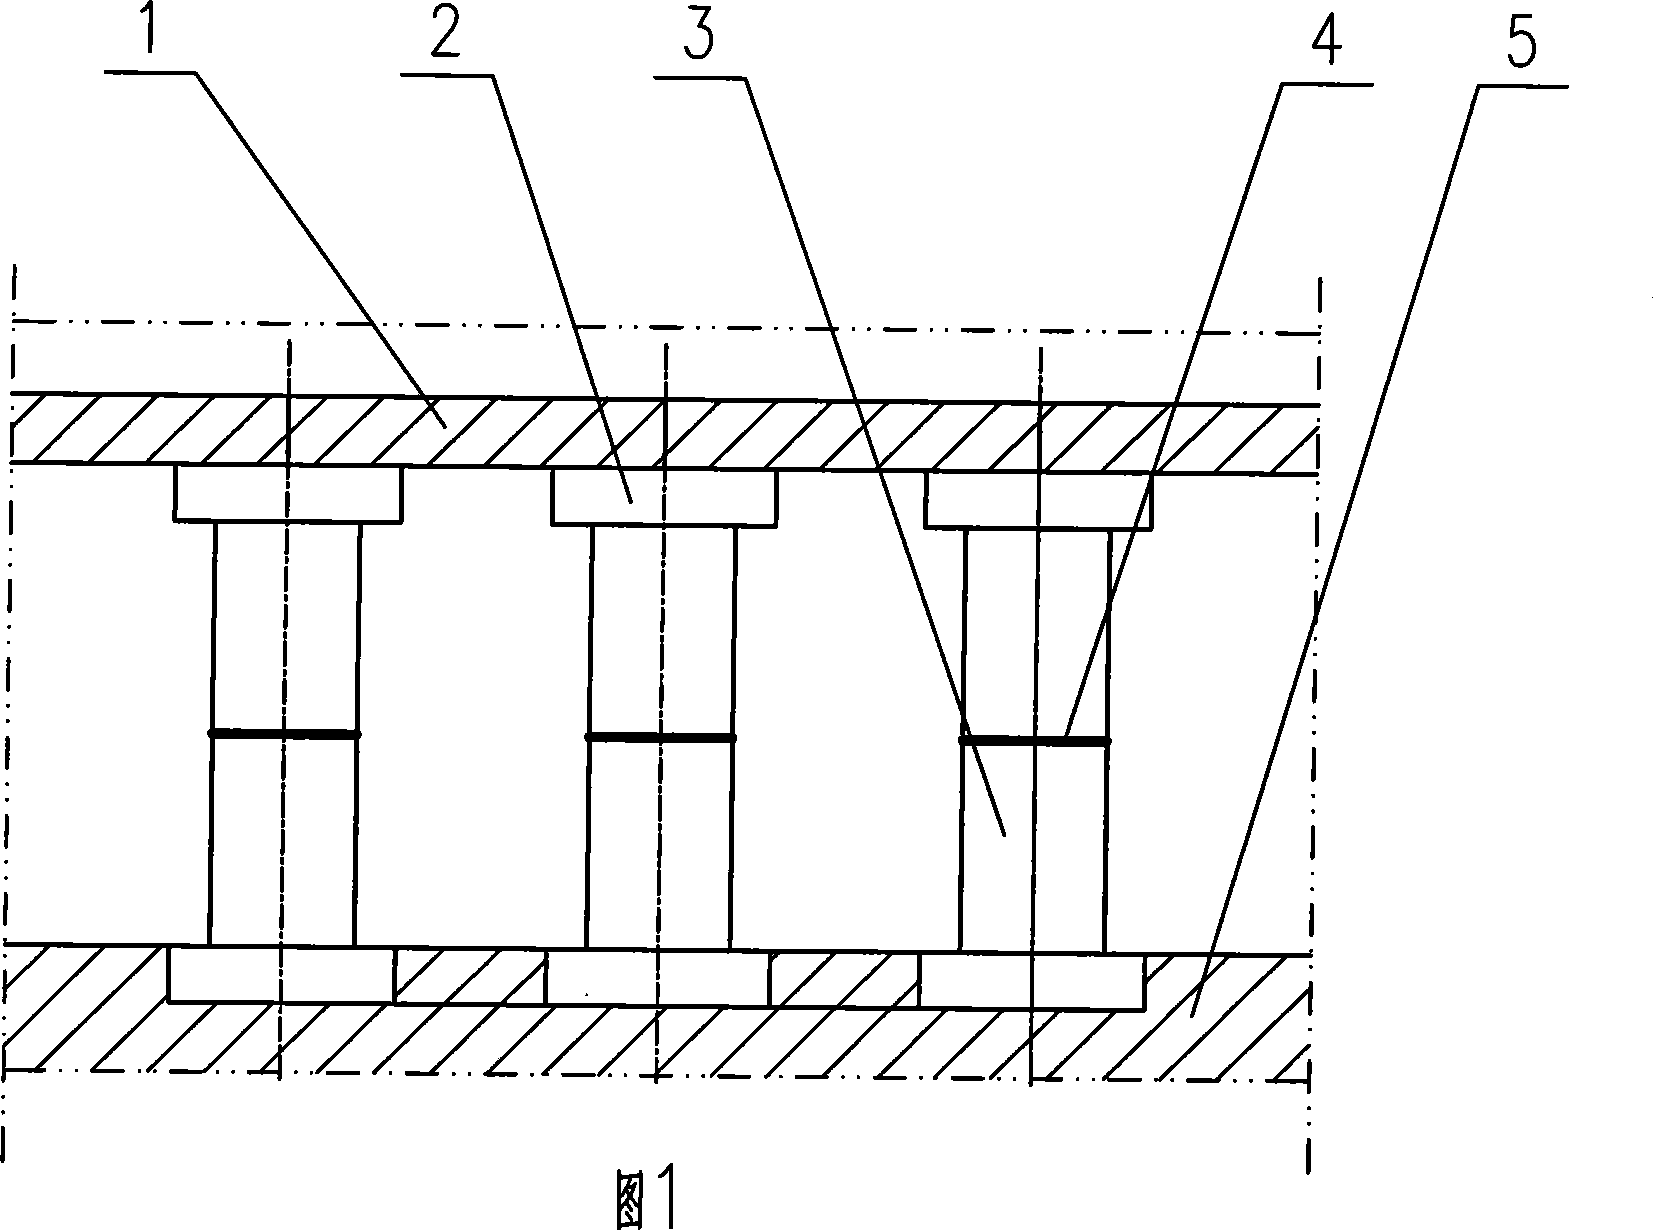 Bottom flue gas passage structure of electrode calcination furnace with cap